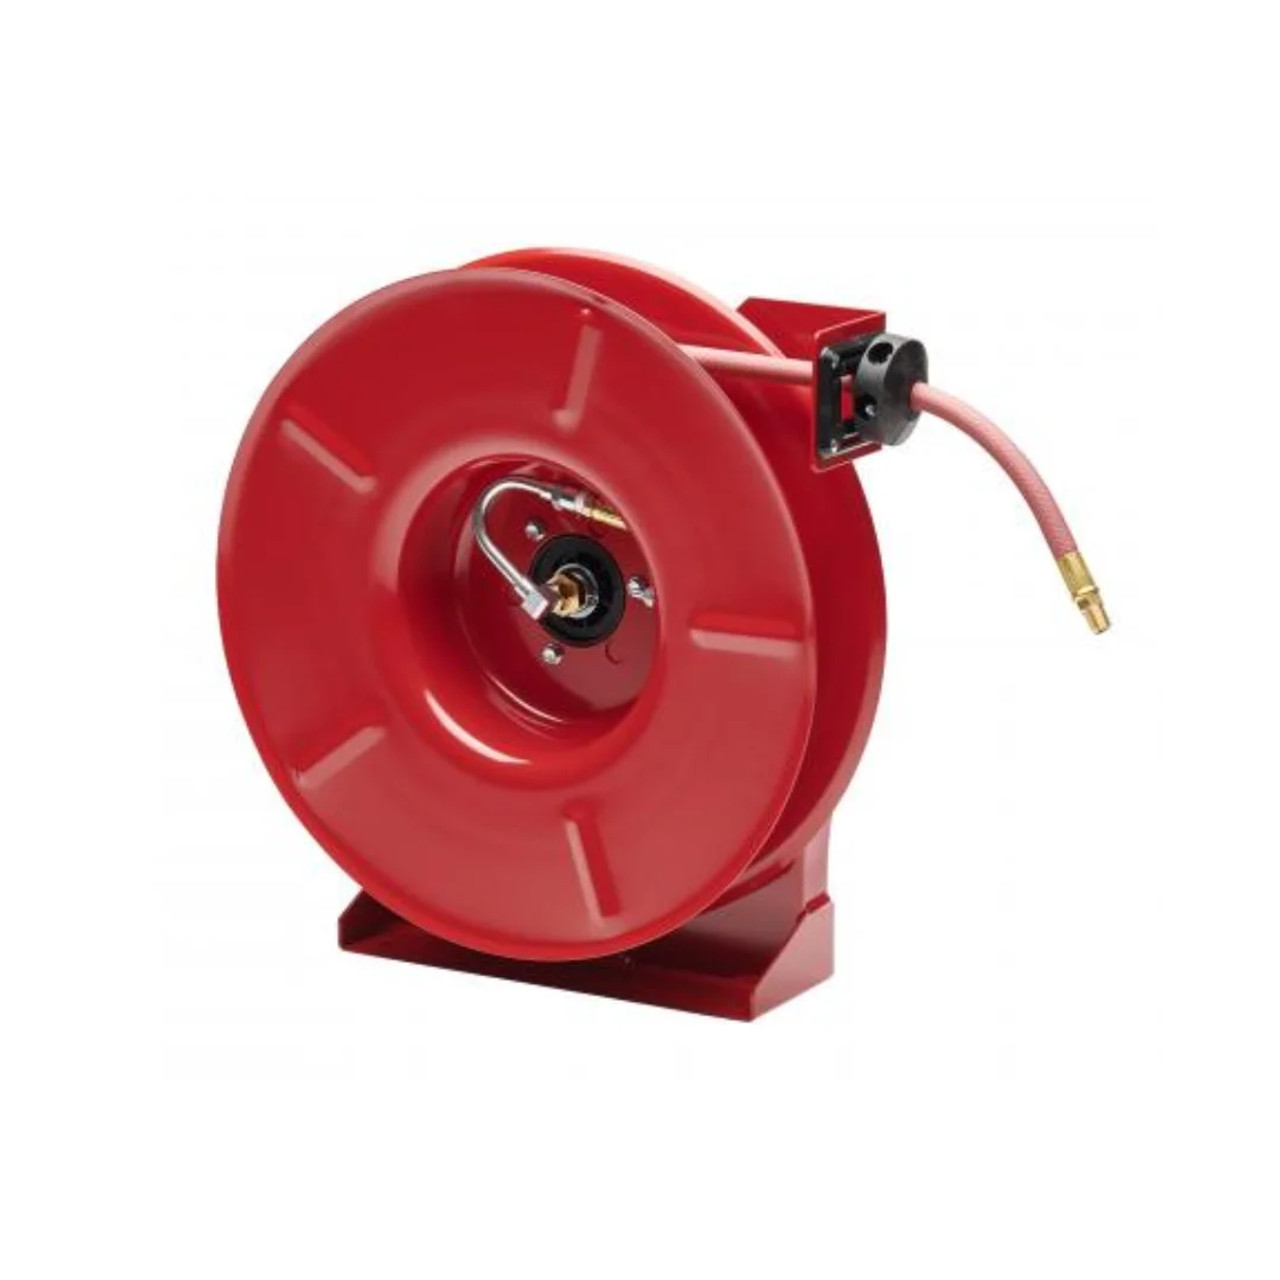 https://cdn11.bigcommerce.com/s-48ae1/images/stencil/1280x1280/products/165793/143215/Reelcraft_5650_Olp_AirWater_With_Hose_300_Psi_Hose_Reel_38_X_50Ft_Hose_Reel_38_x_50ft_1__20258.1691160340.jpg?c=2